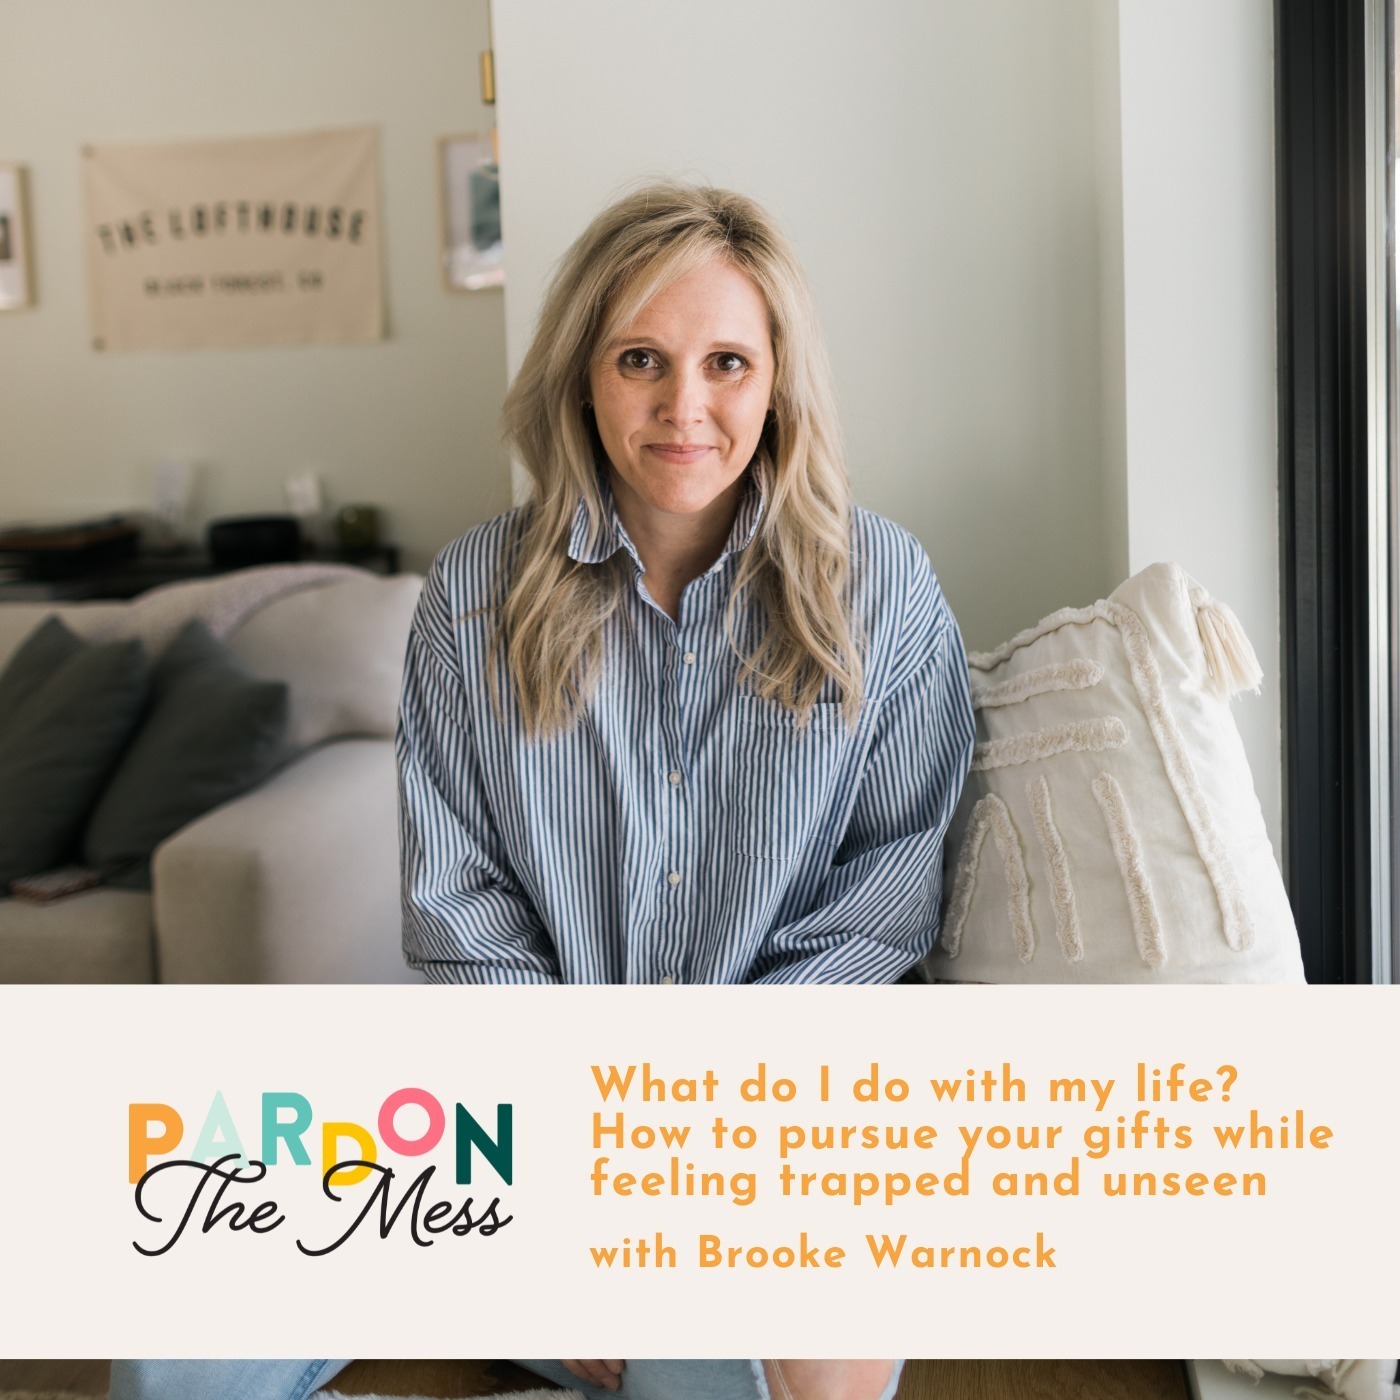 What do I do with my life? How to pursue your gifts while feeling trapped and unseen with Brooke Warnock